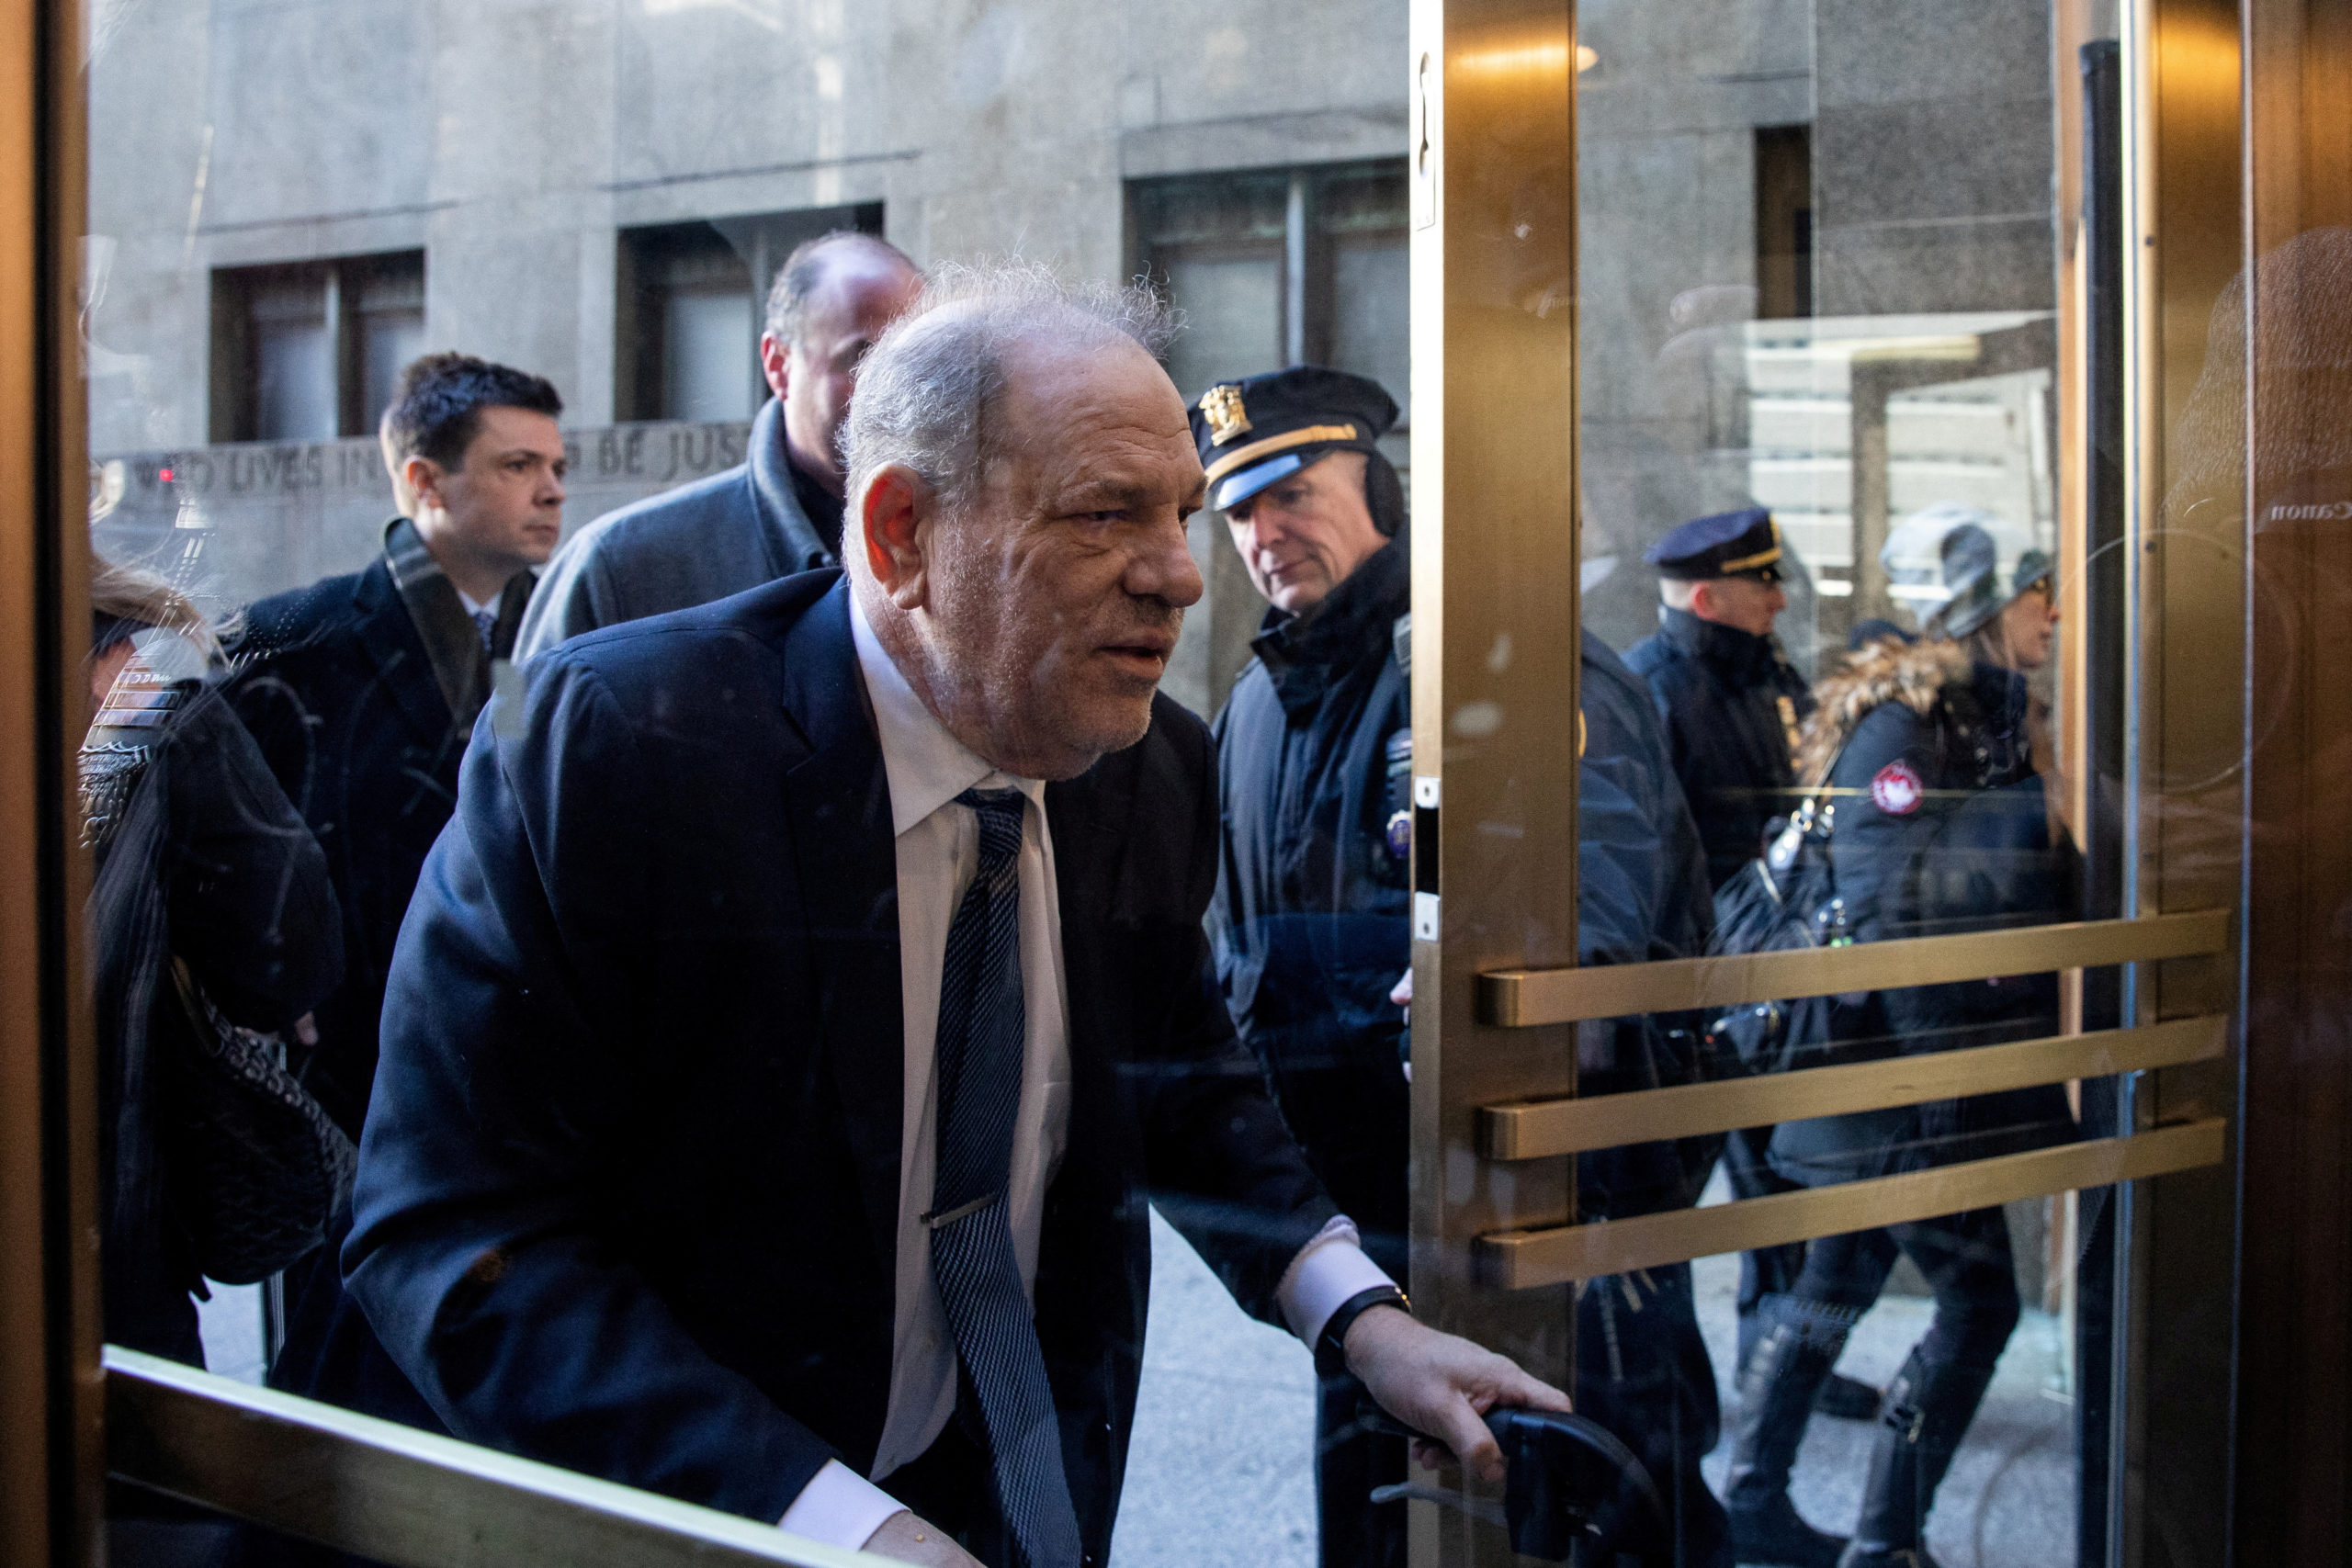 FILE PHOTO: Film producer Harvey Weinstein arrives at New York Criminal Court for his sexual assault trial in the Manhattan borough of New York City, New York, U.S., February 21, 2020. REUTERS/Jeenah Moon/File Photo